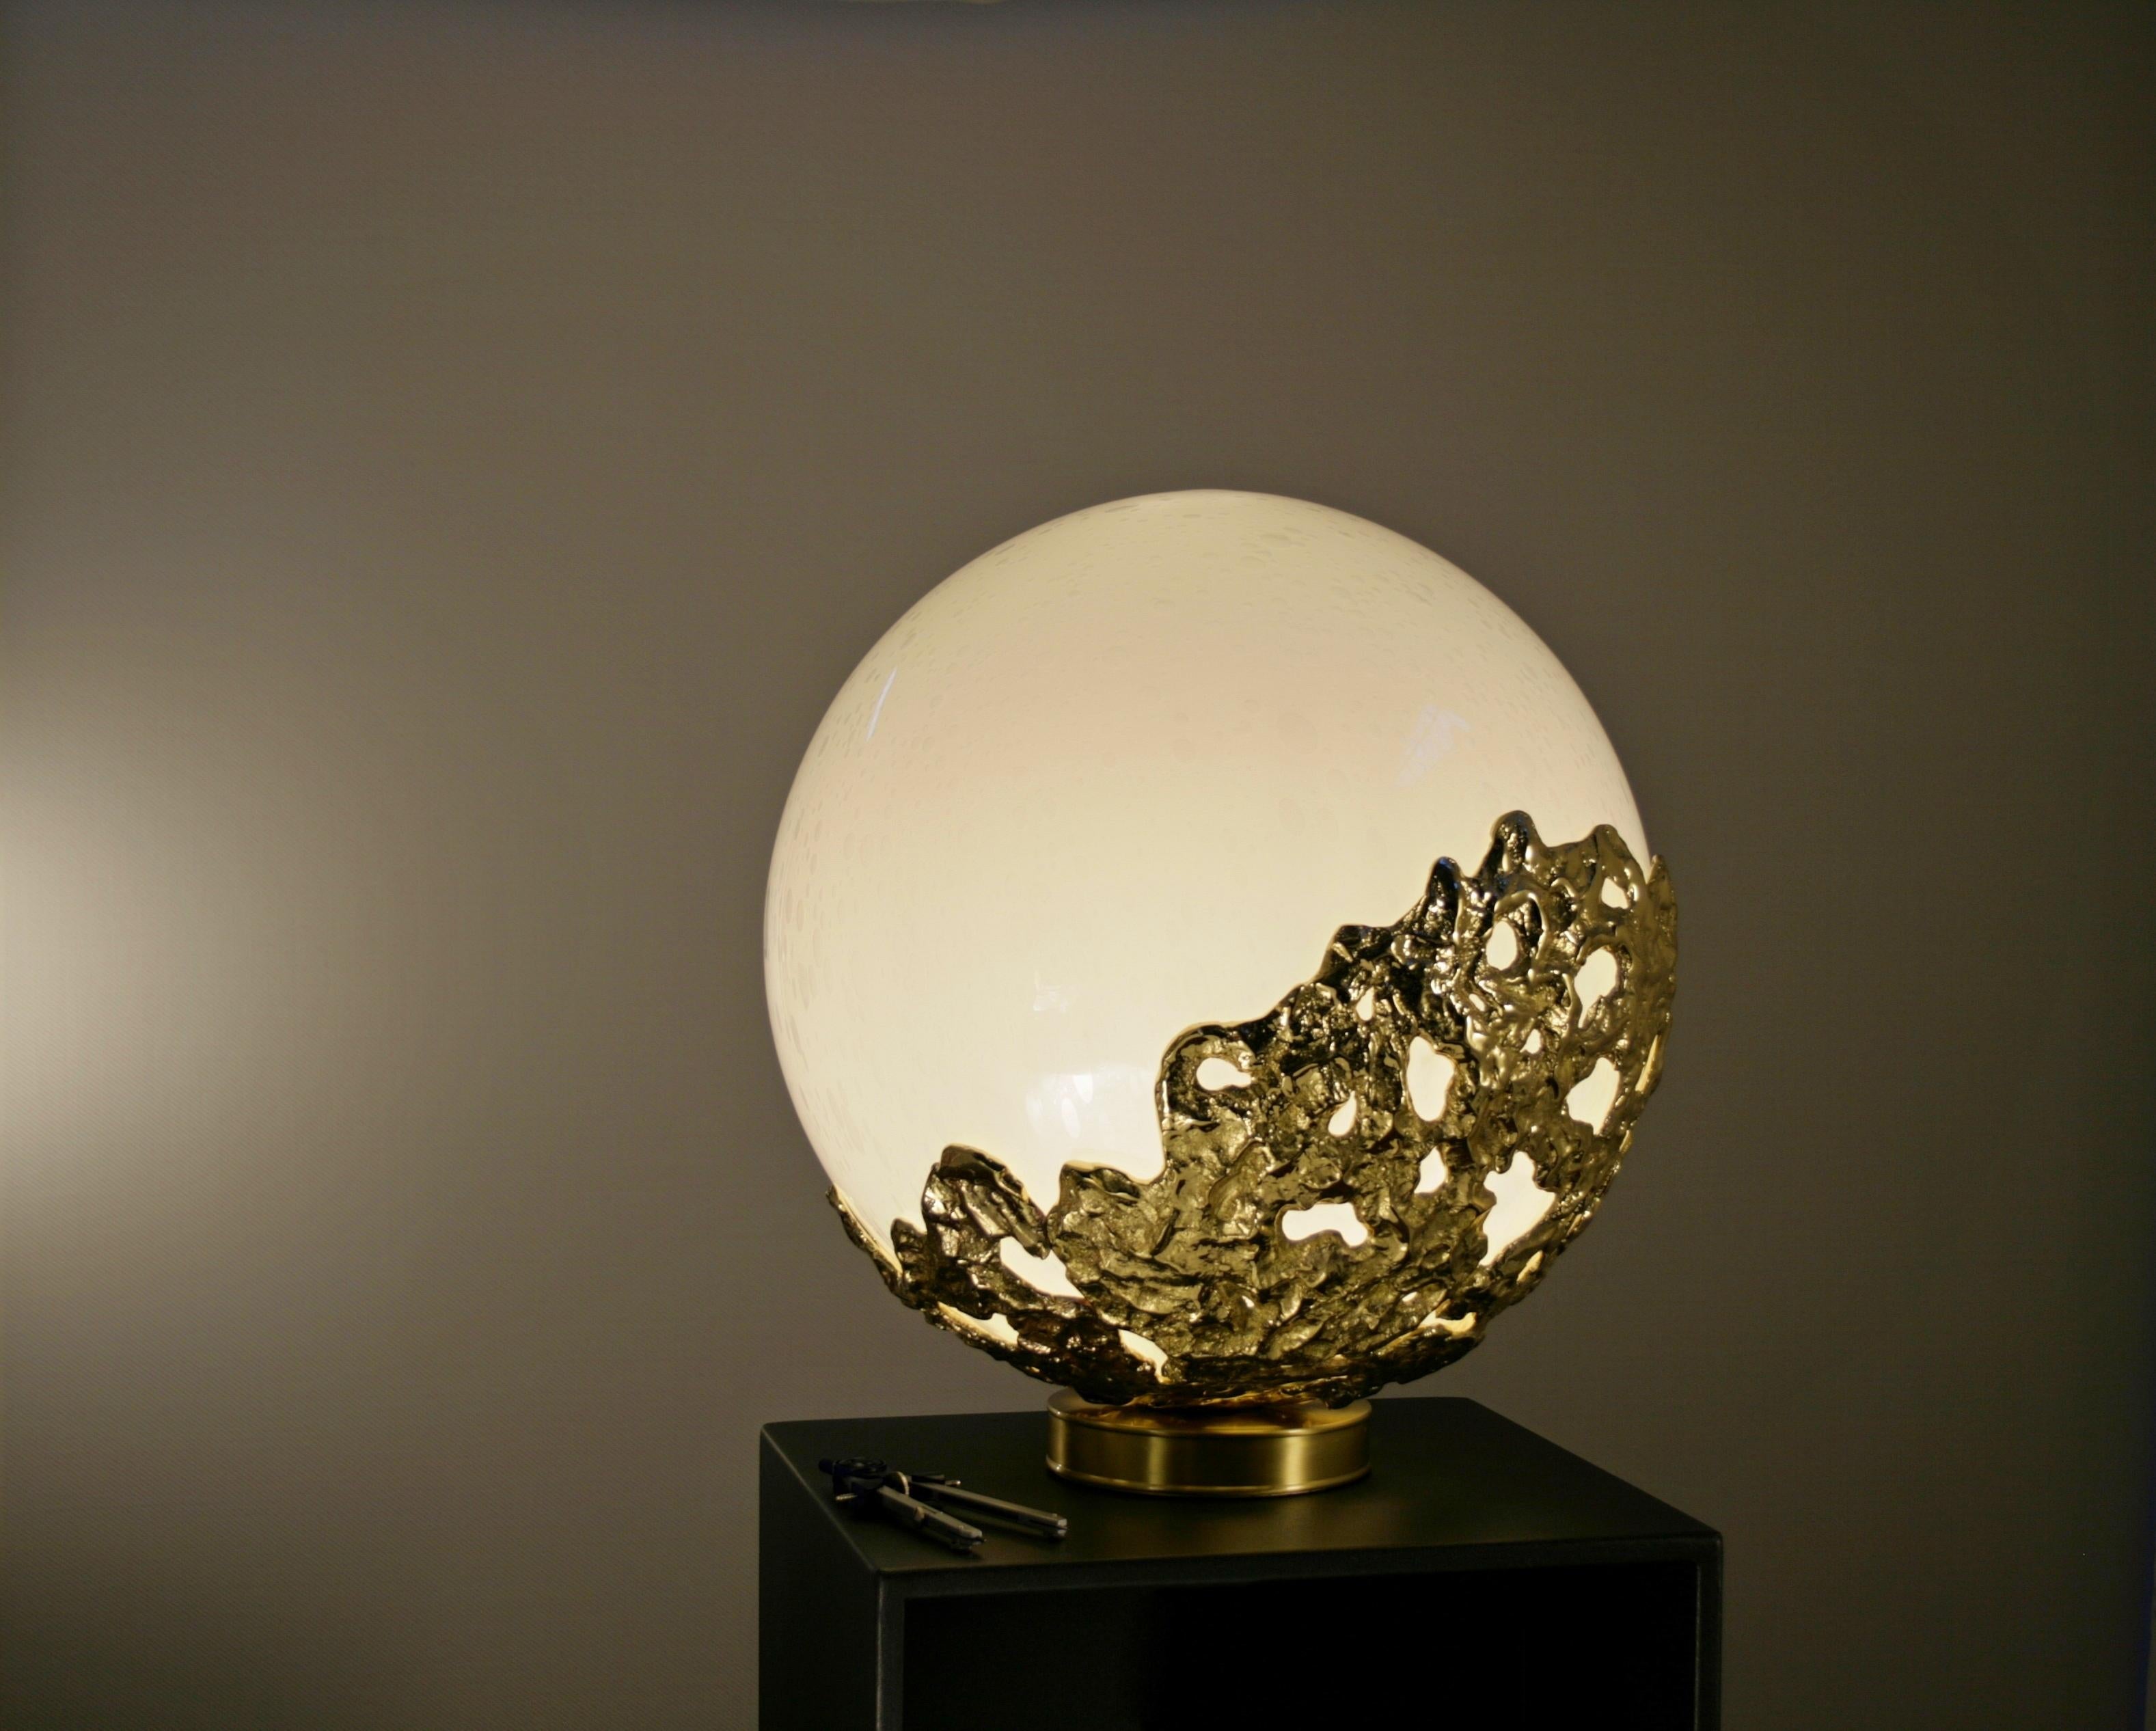 Esperia’s moon. There is not much more to say. The “pulegoso” decoration of the glass takes us to the surface of the moon. Brotto added an artistic cast brass shell to the already complete design of the planet, to further enhance the effect of light